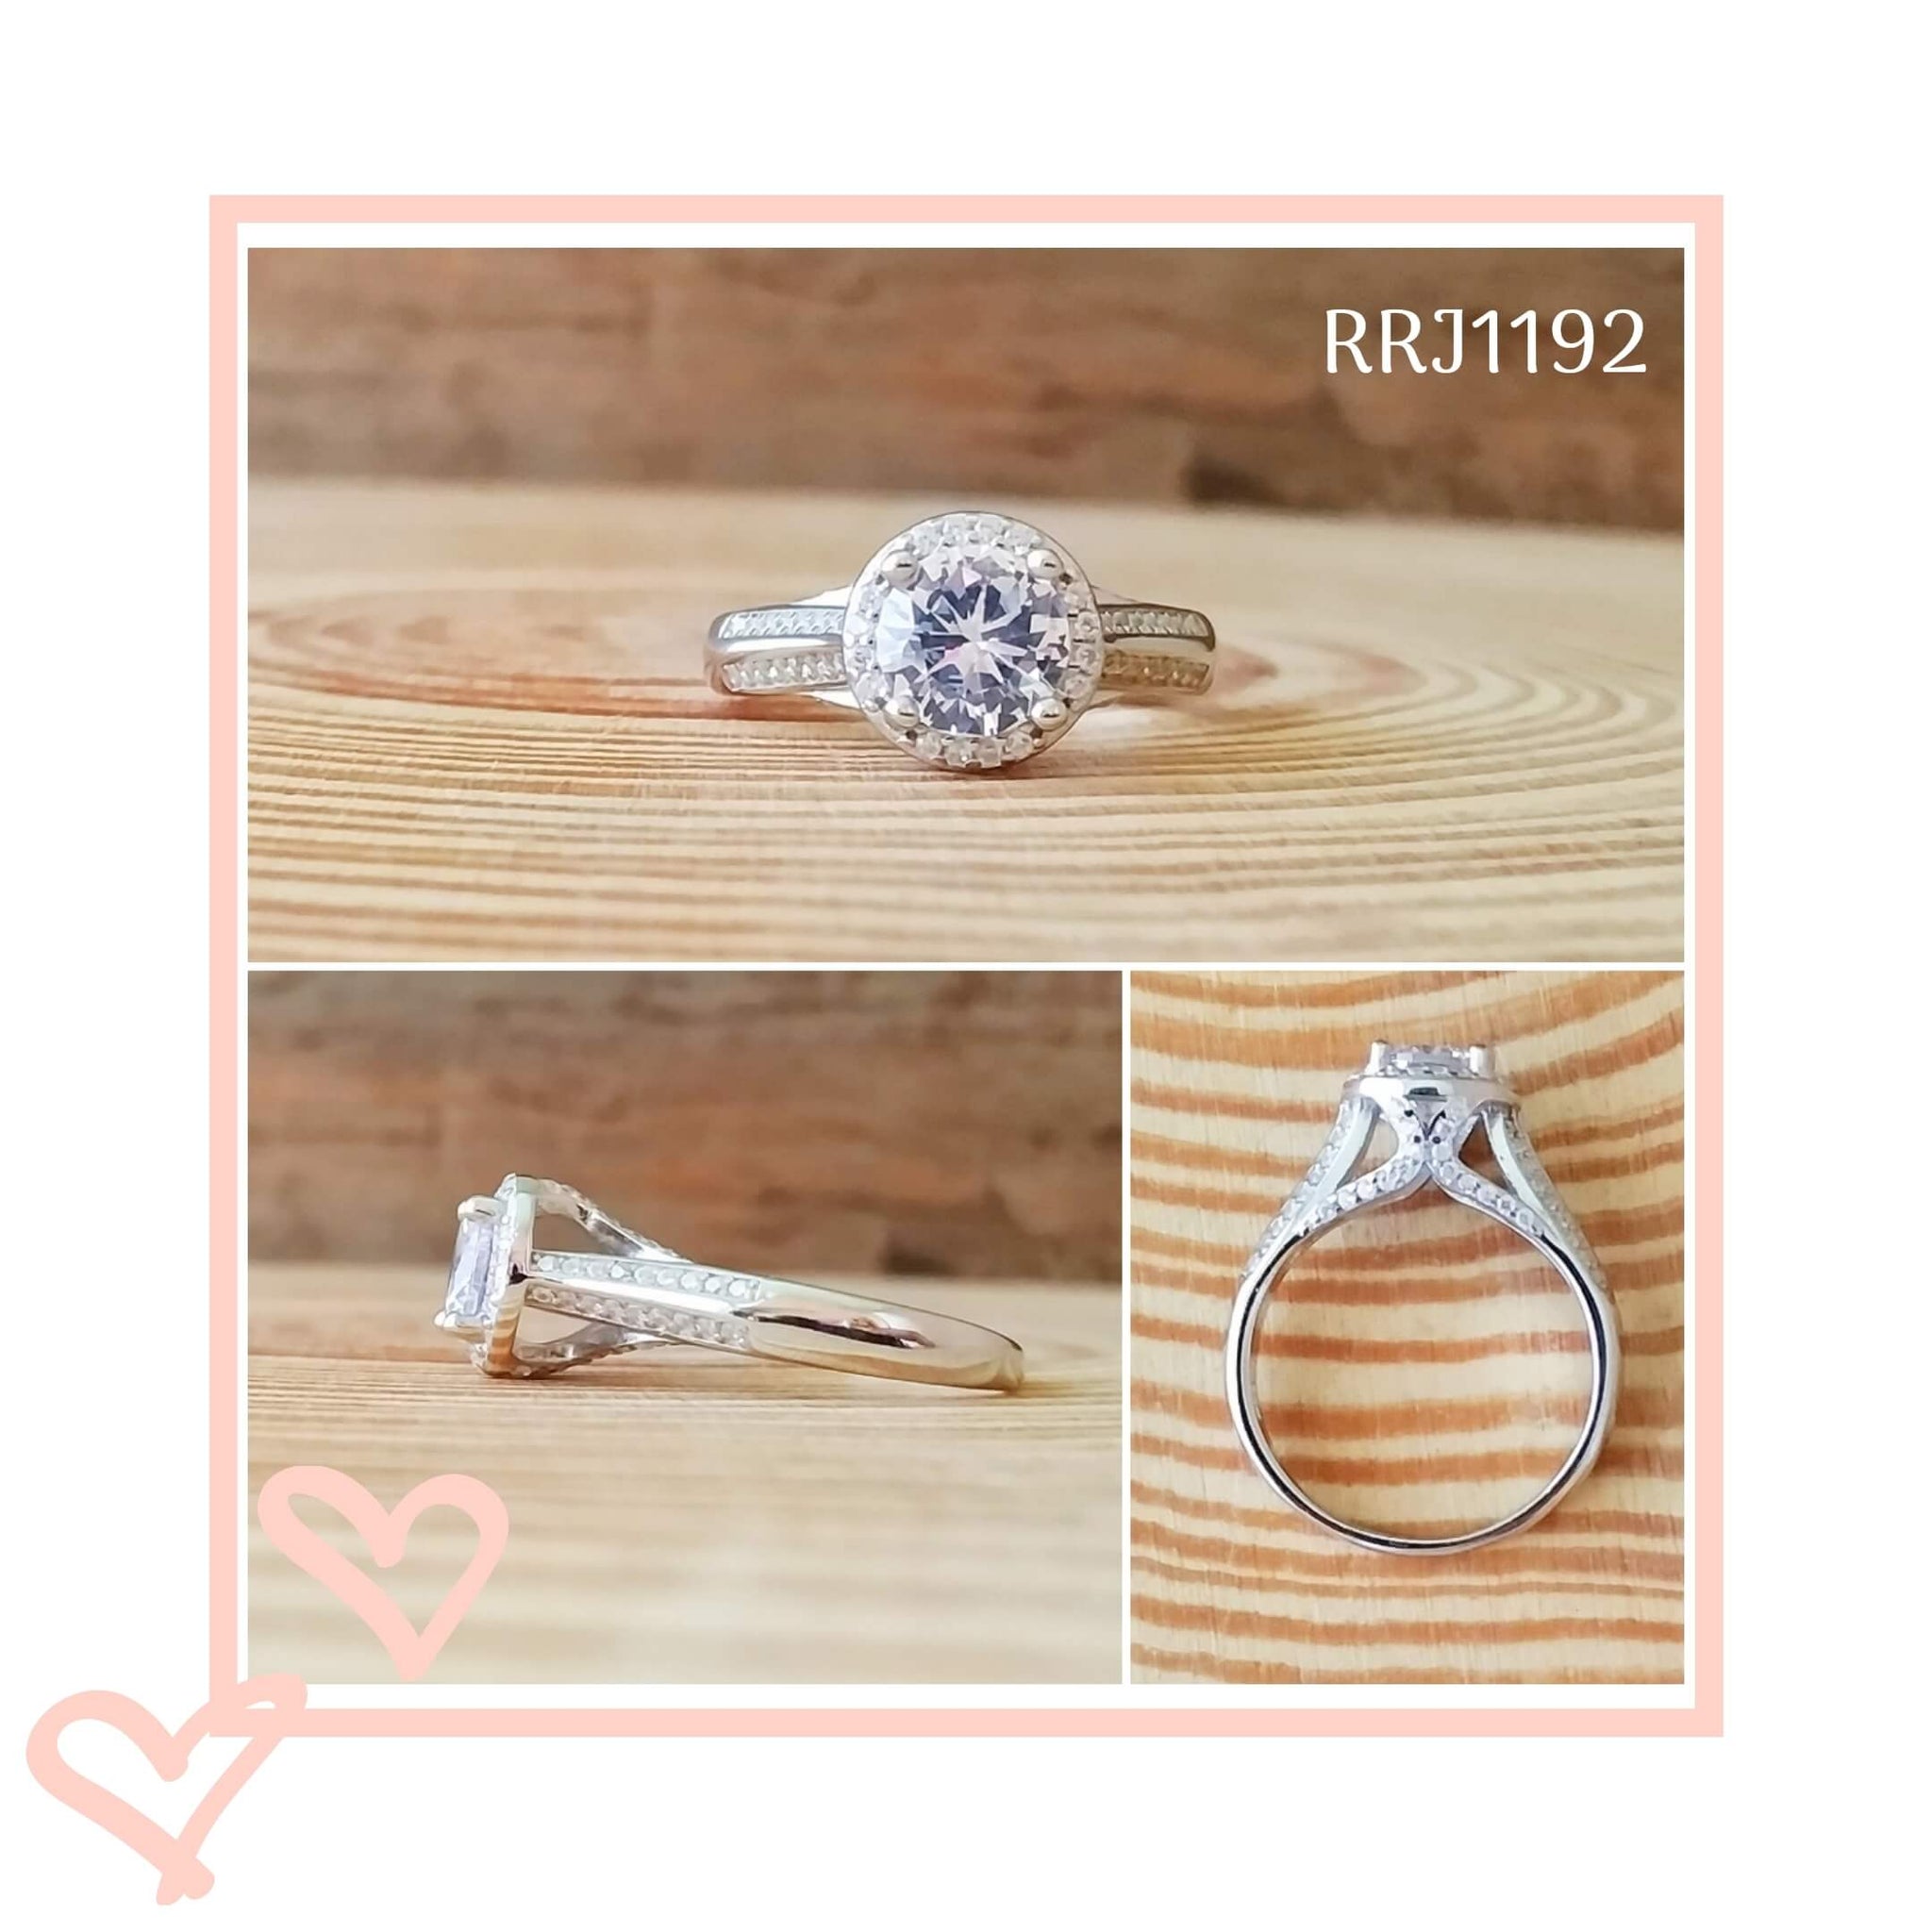 RRJ1192 Pure 925 Sterling Silver Ring